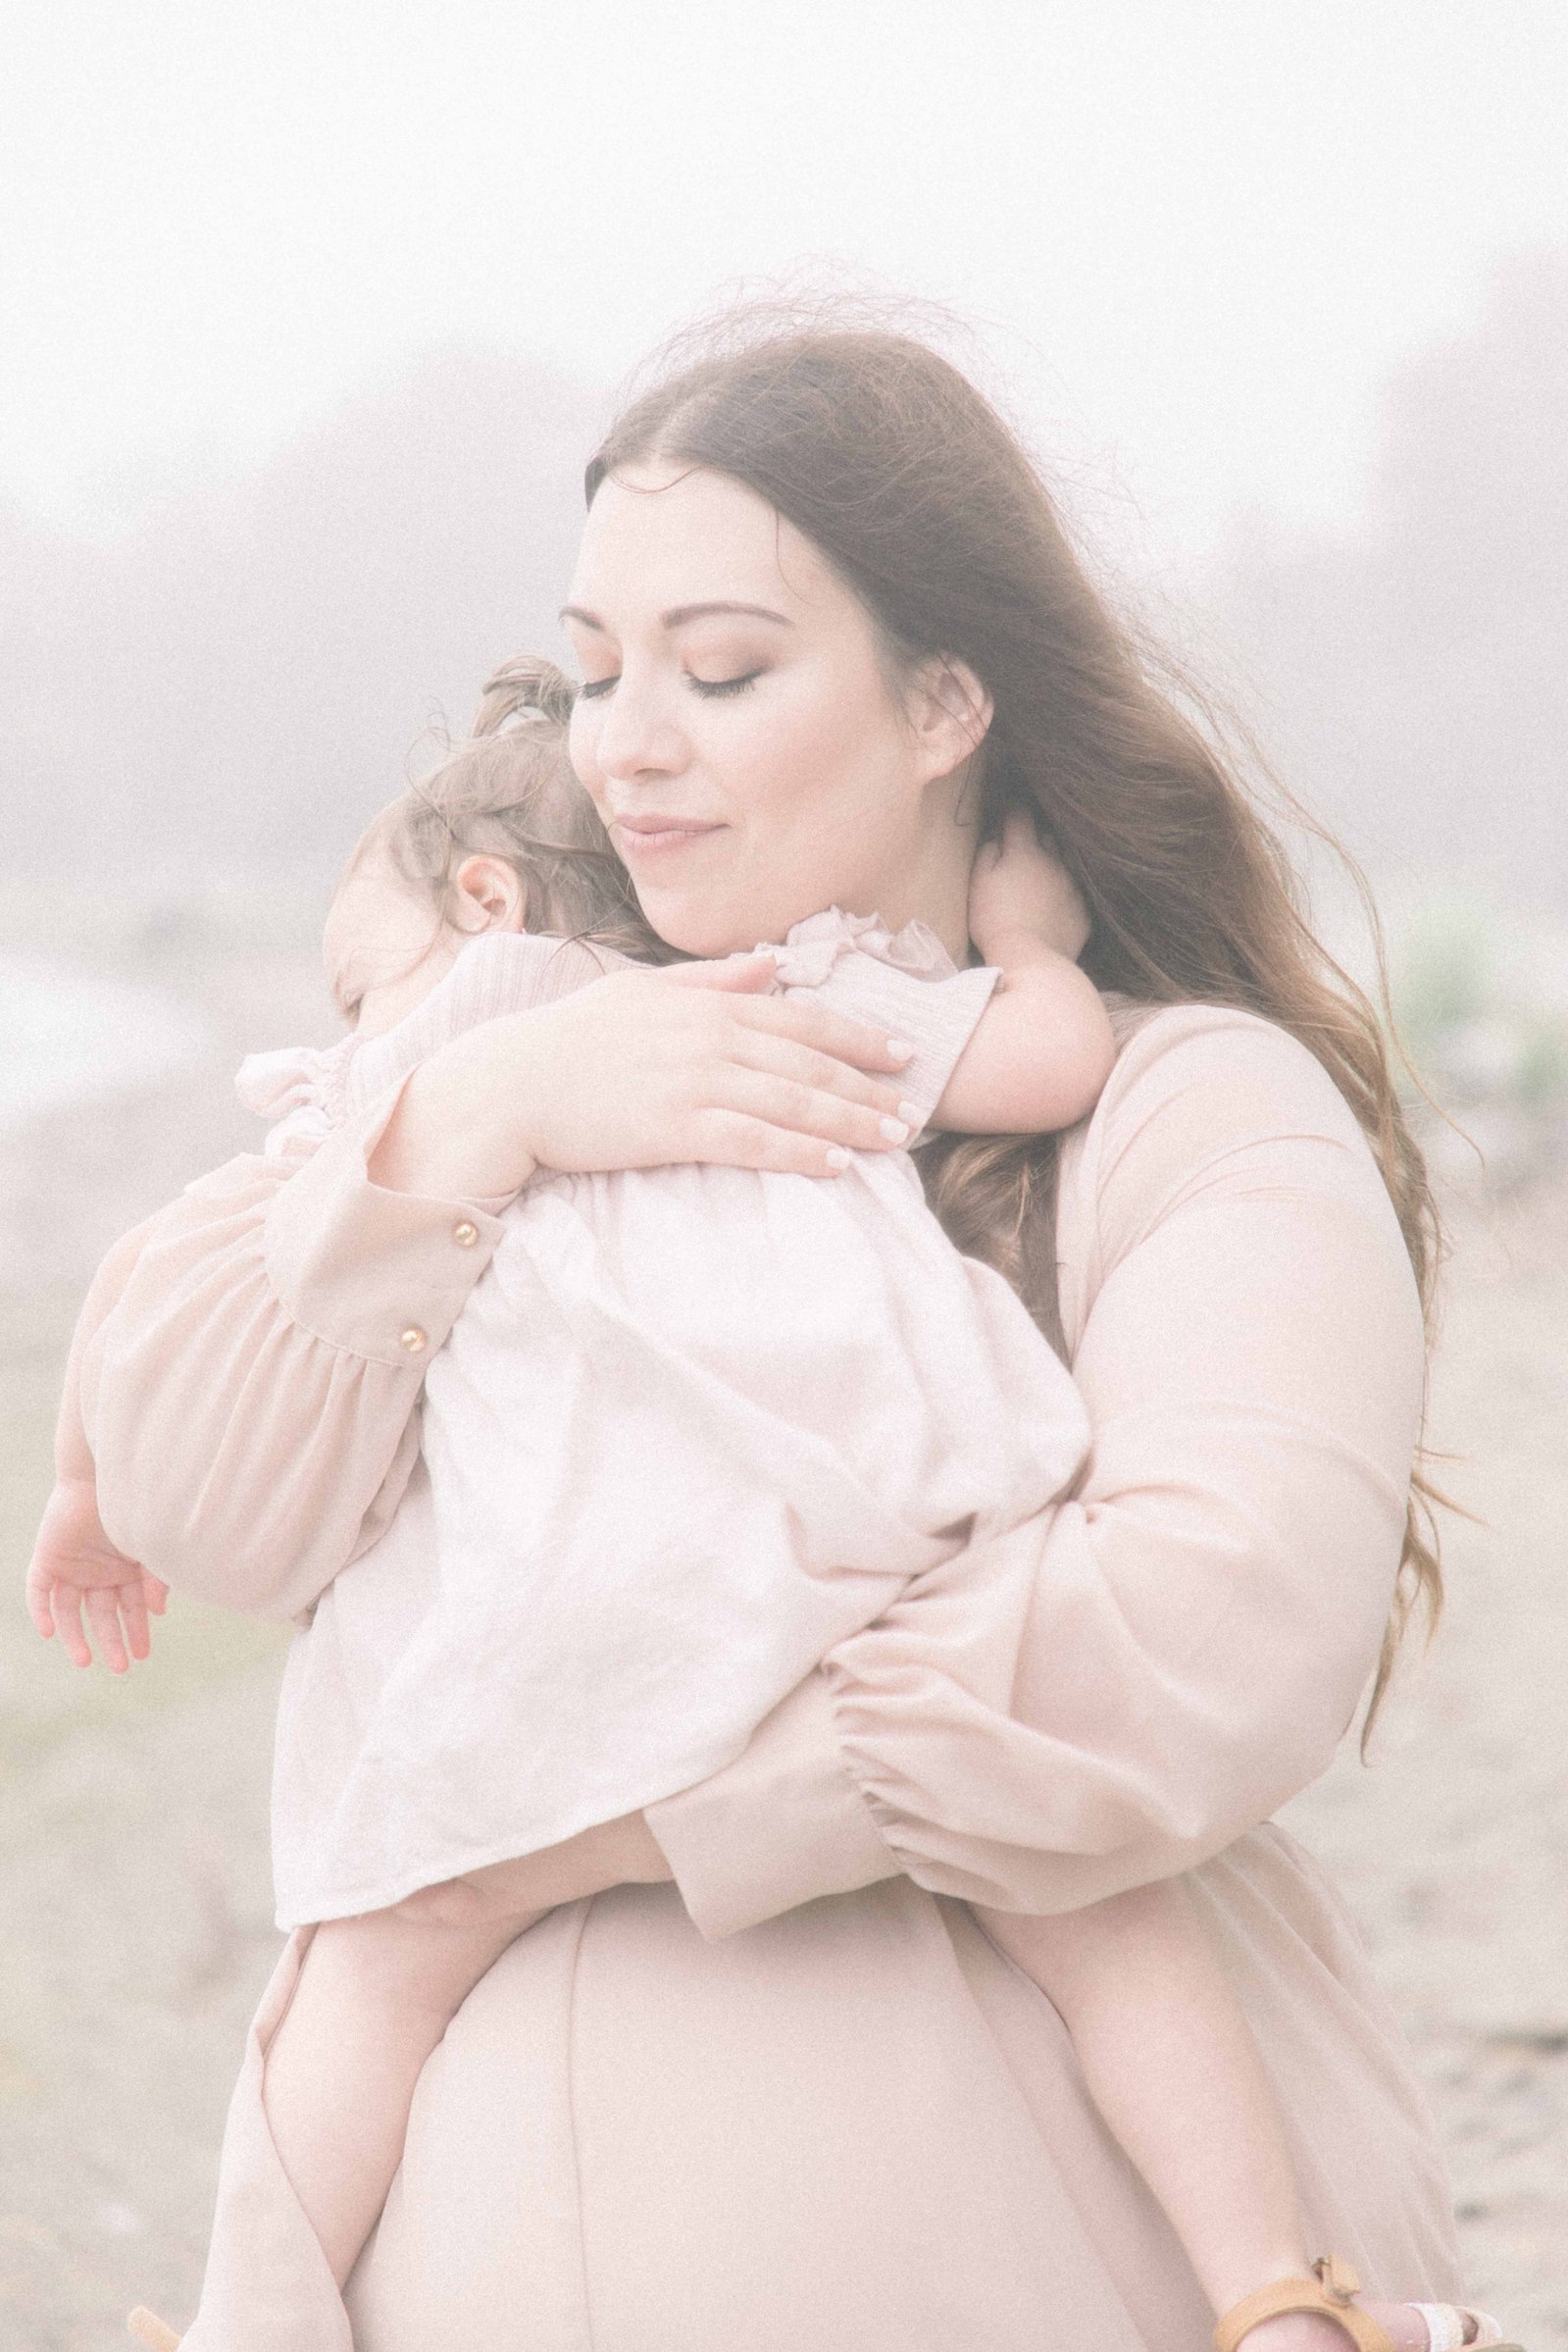 Portrait of mother hugging baby daughter with her eyes closed by the beach. Emily VanderBeek Photography, Portrait and Family Photography, Kids Photography, Niagara Photographer, Champlain Photographer.